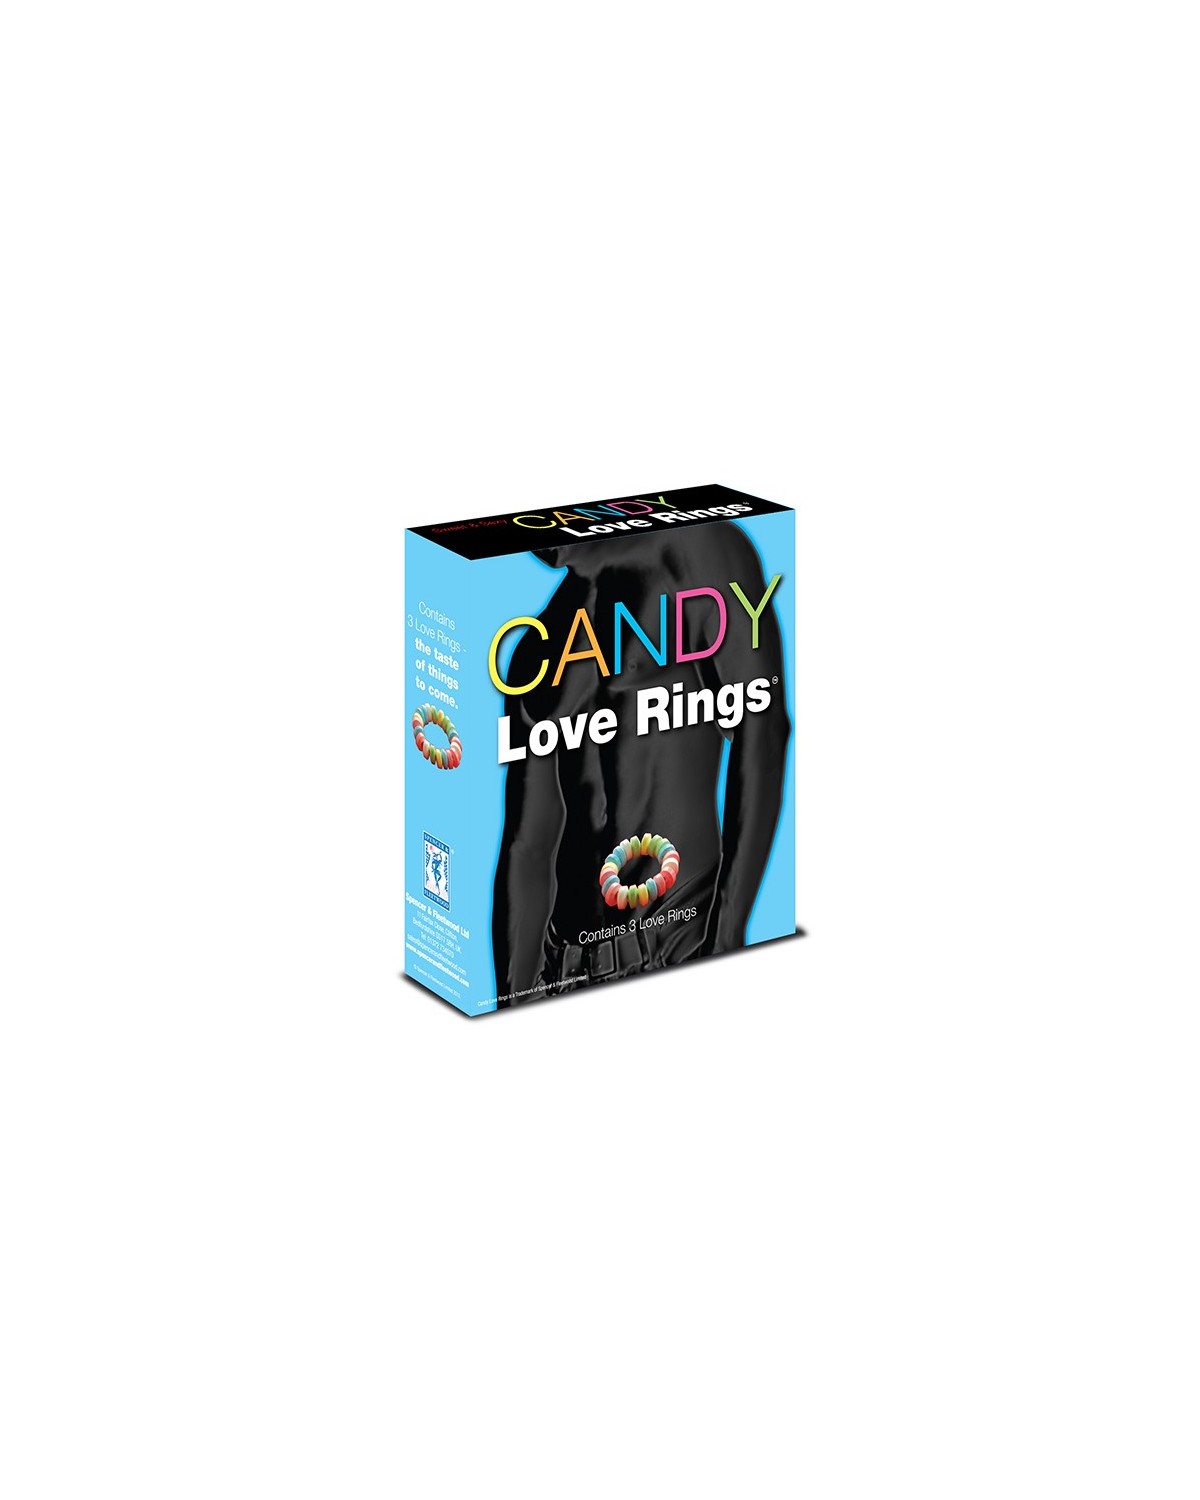 Dessous Bonbons Sweet & Sexy 3 Candy Love Rings